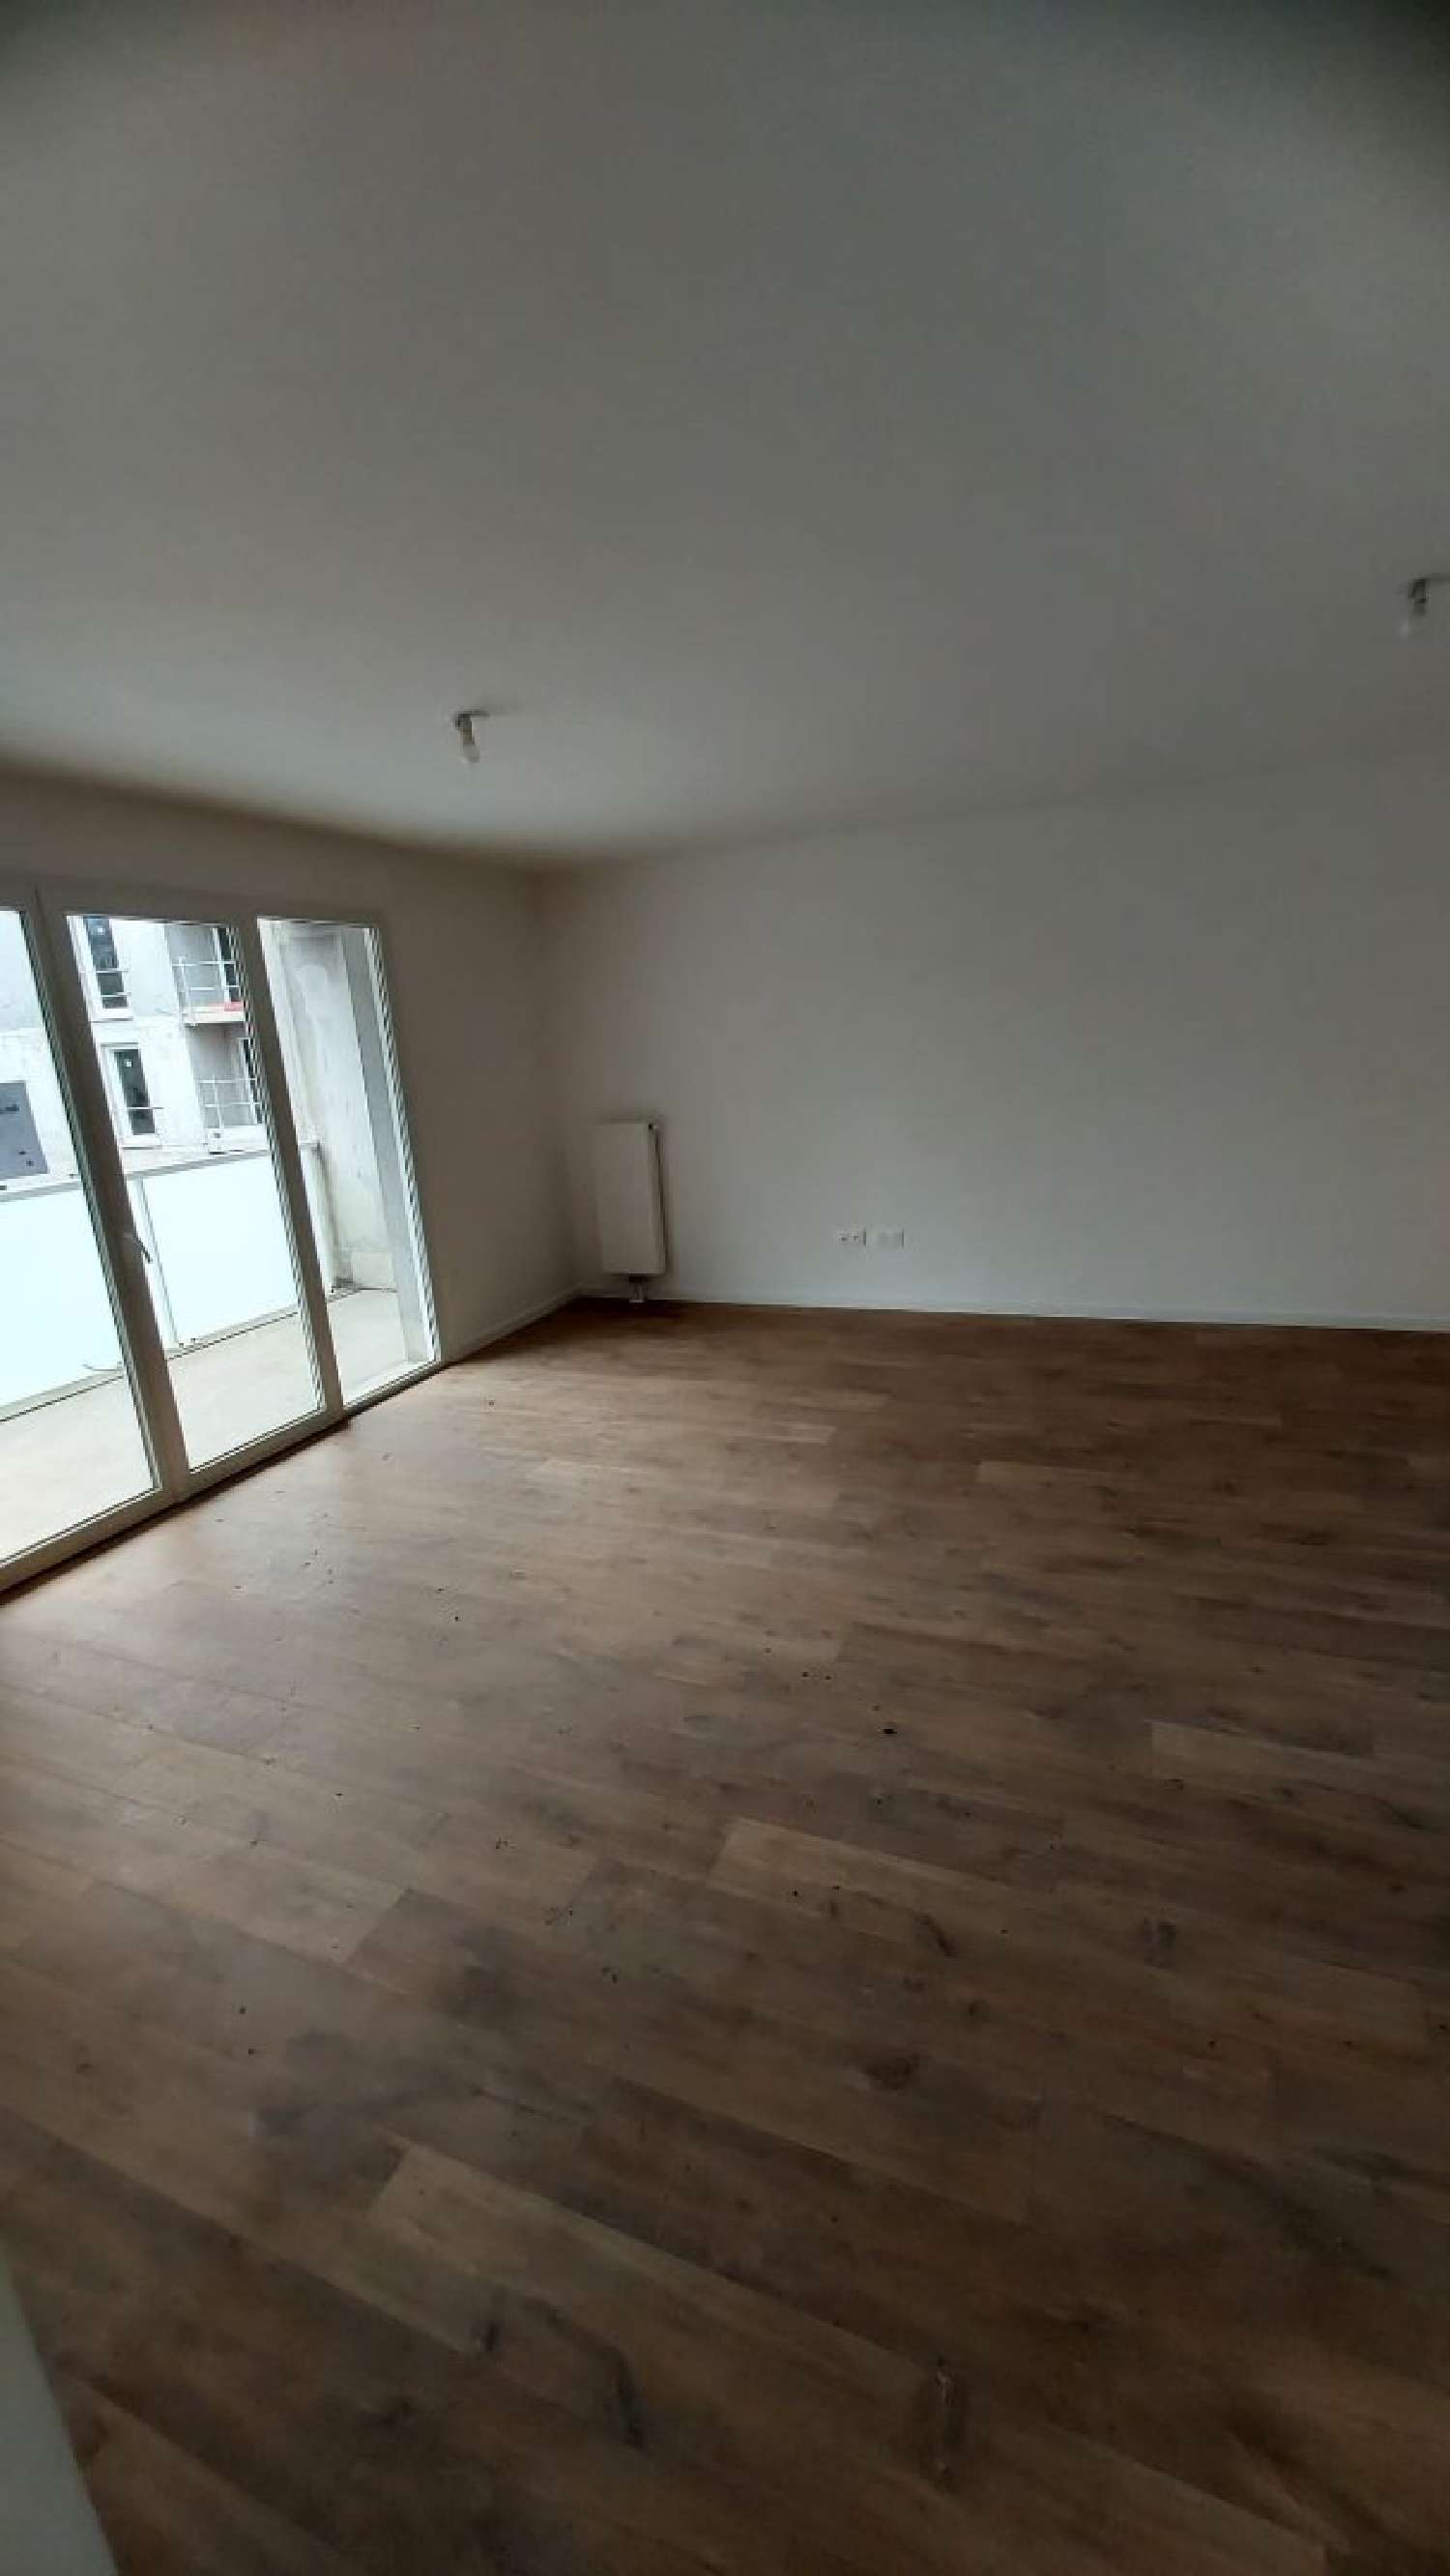  à vendre appartement Tourcoing Nord 4